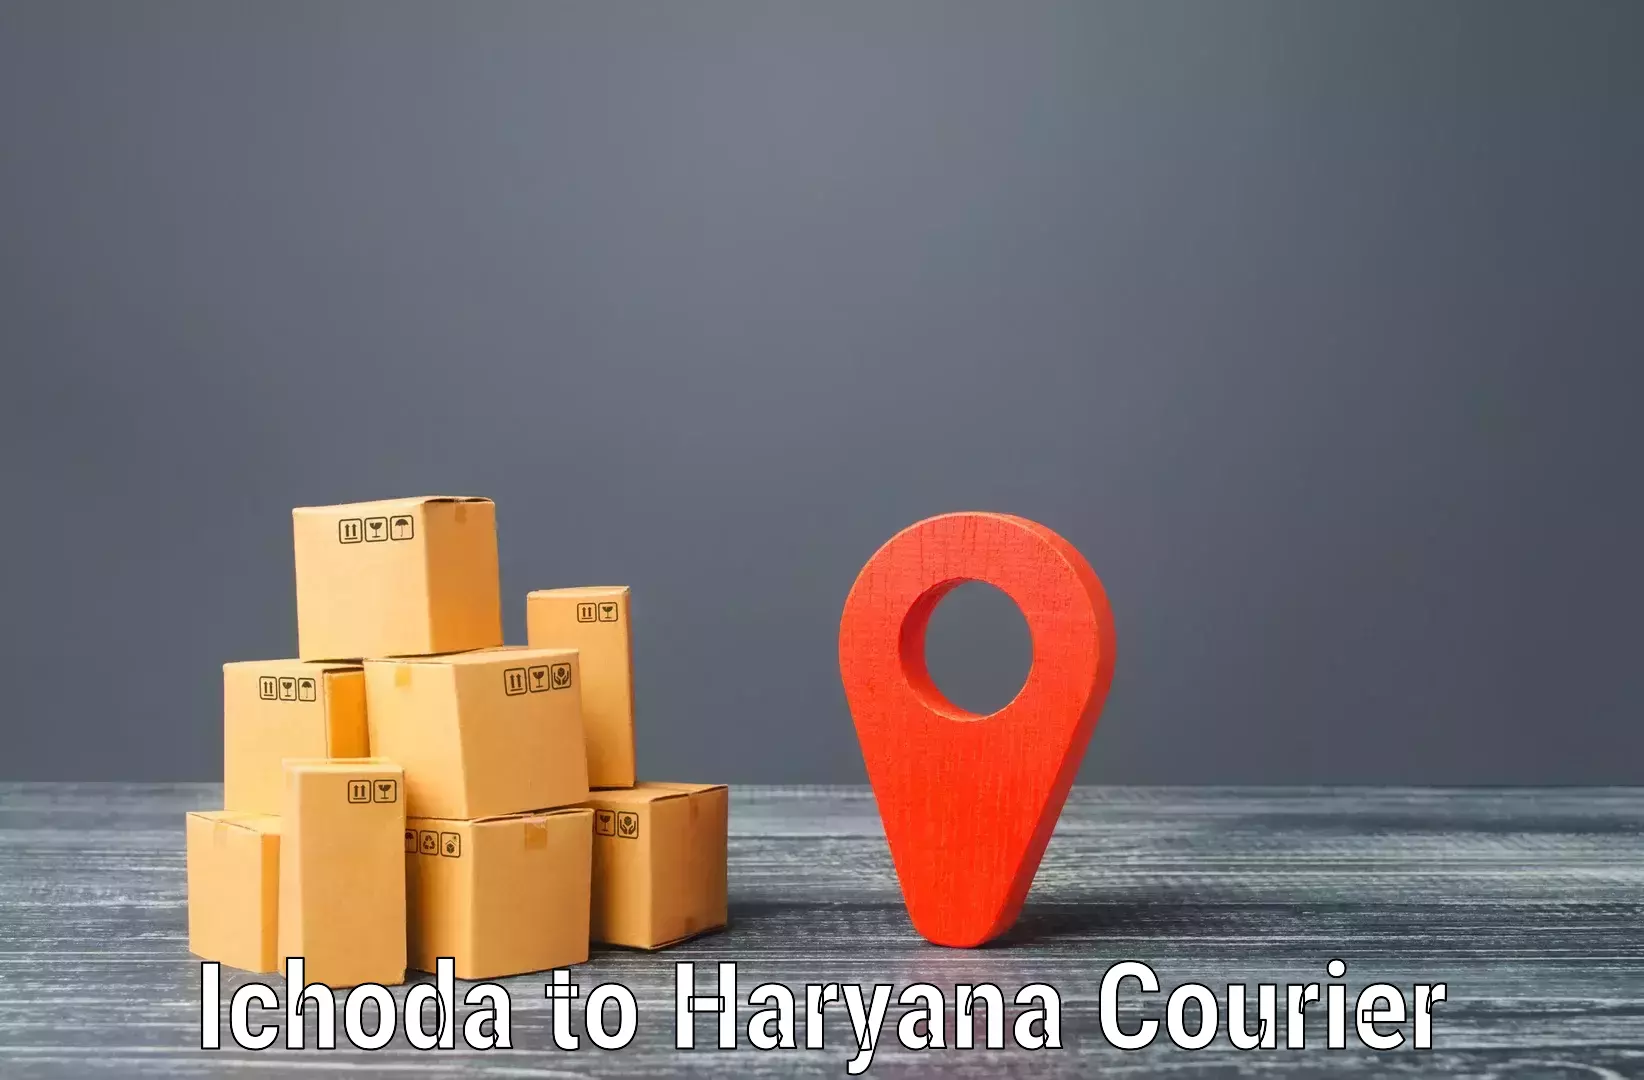 24-hour delivery options Ichoda to Chaudhary Charan Singh Haryana Agricultural University Hisar